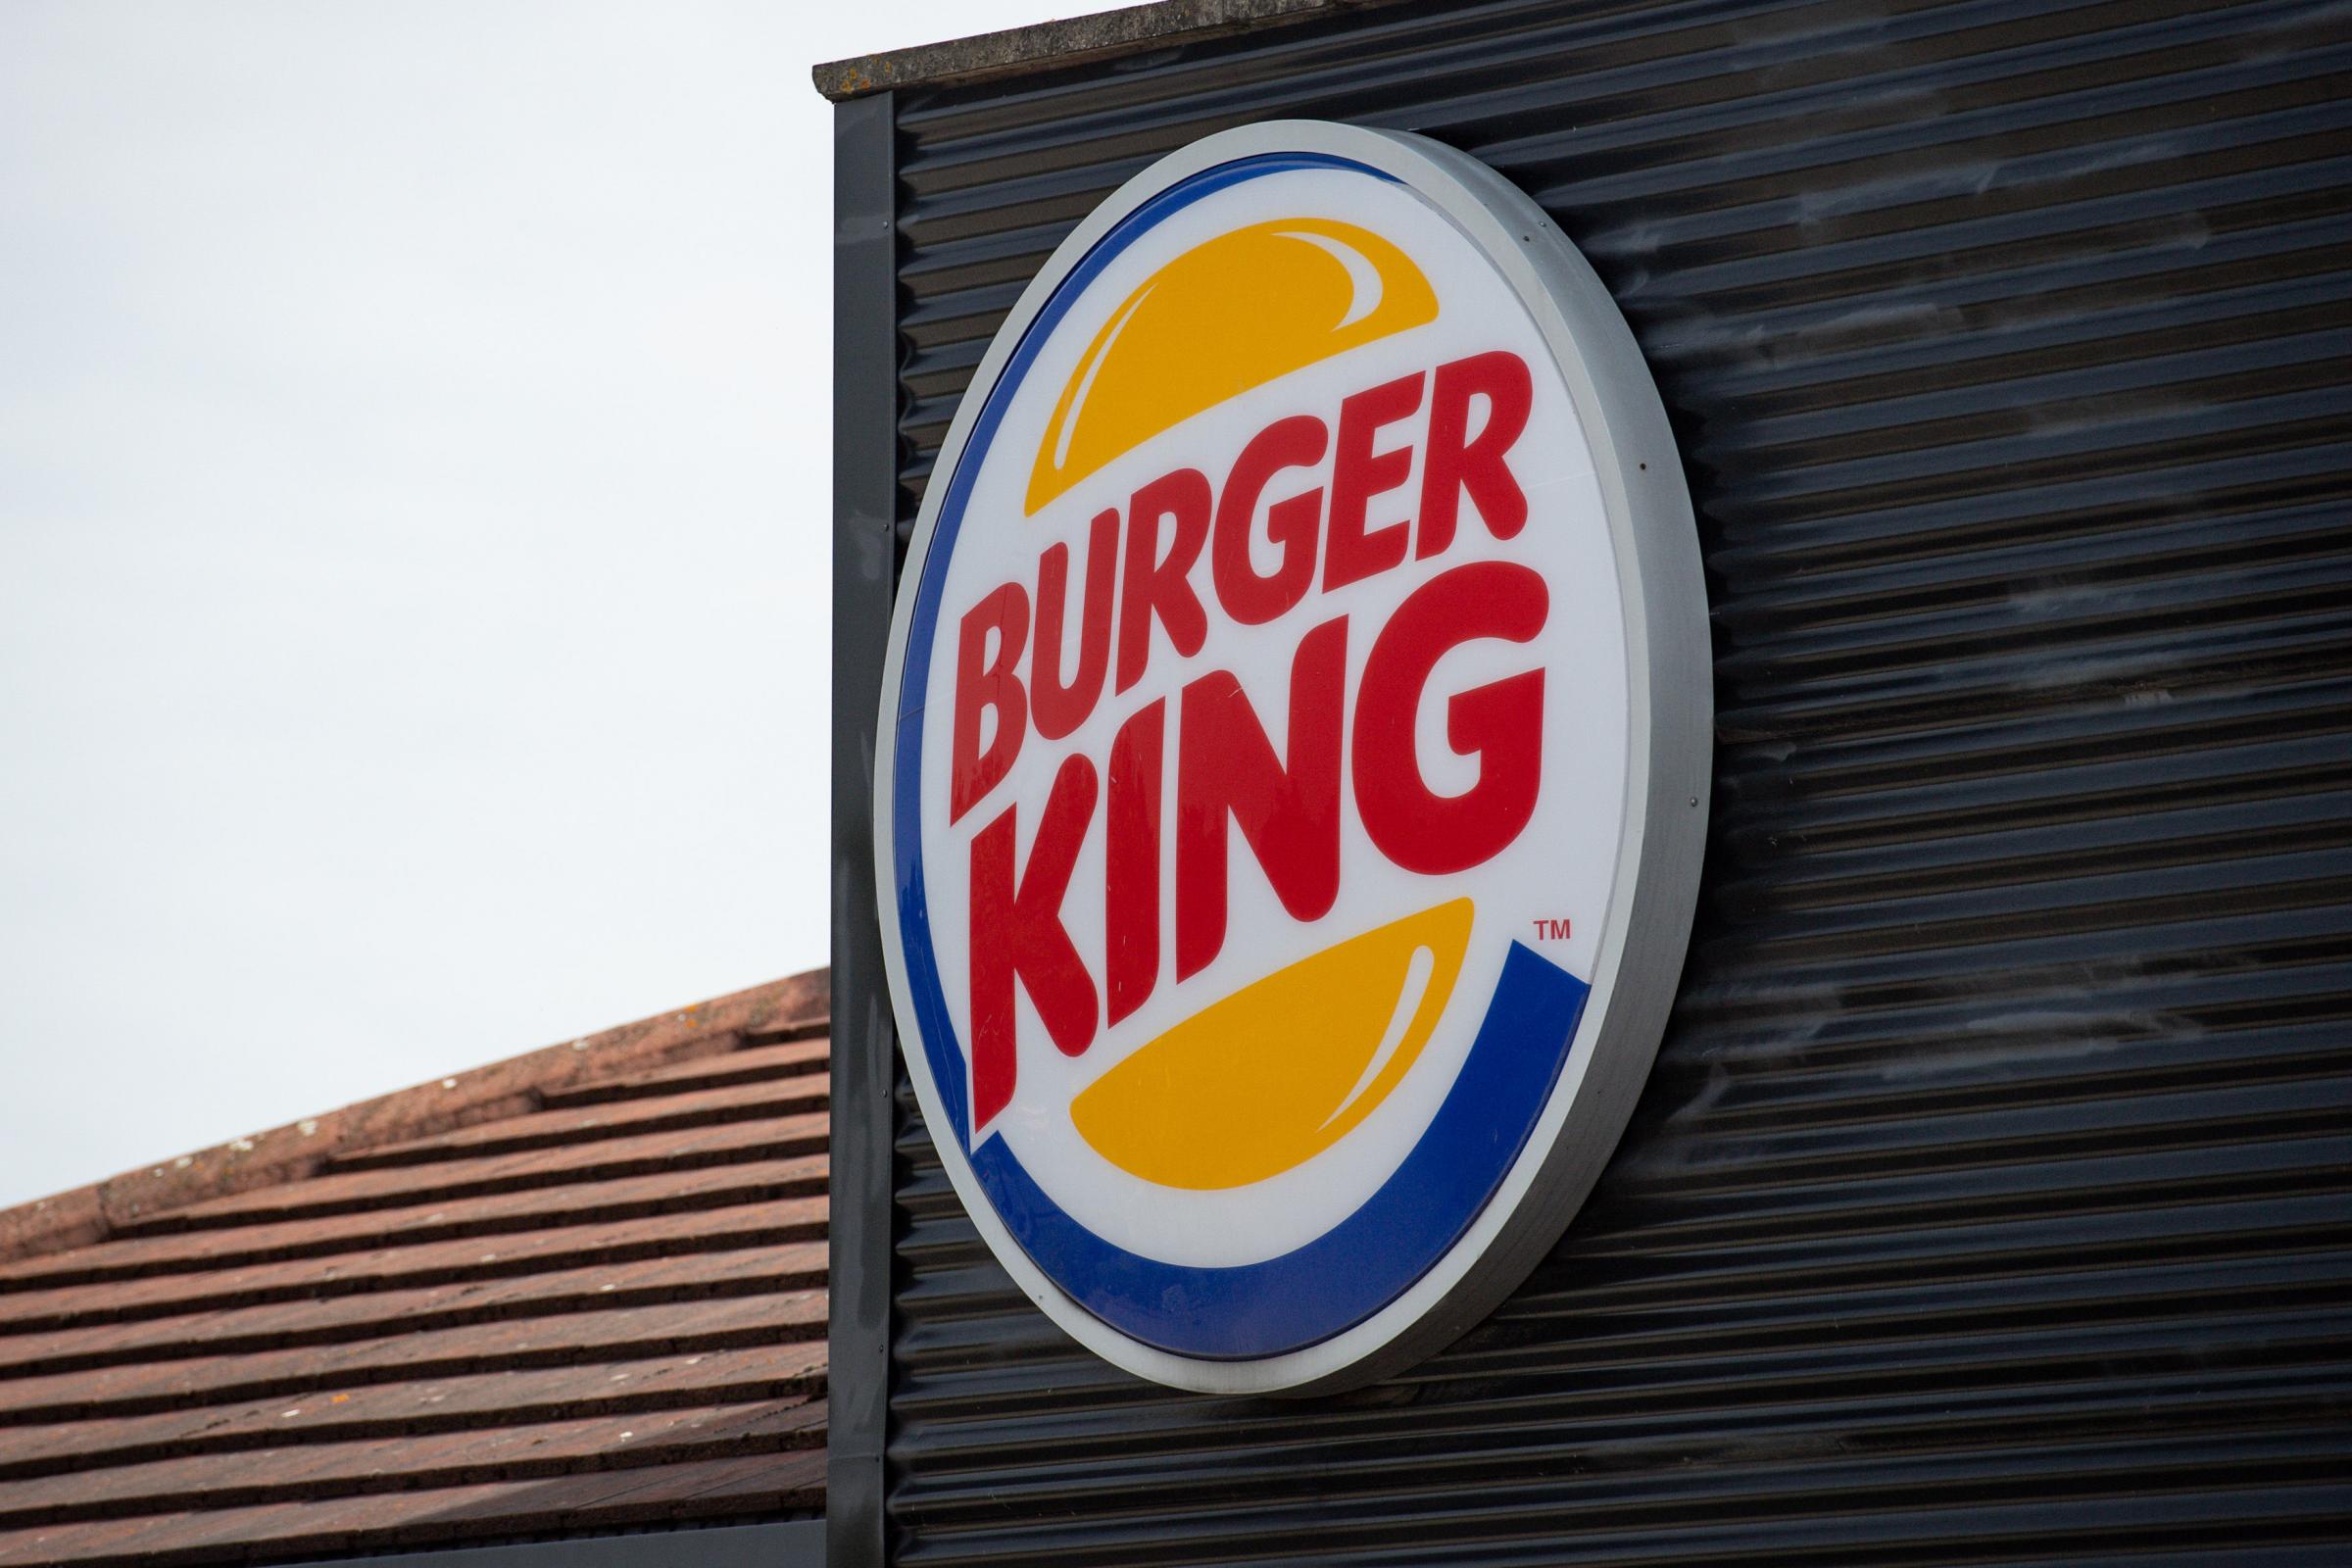 Burger King owner says Russia operator has ‘refused’ to shut stores